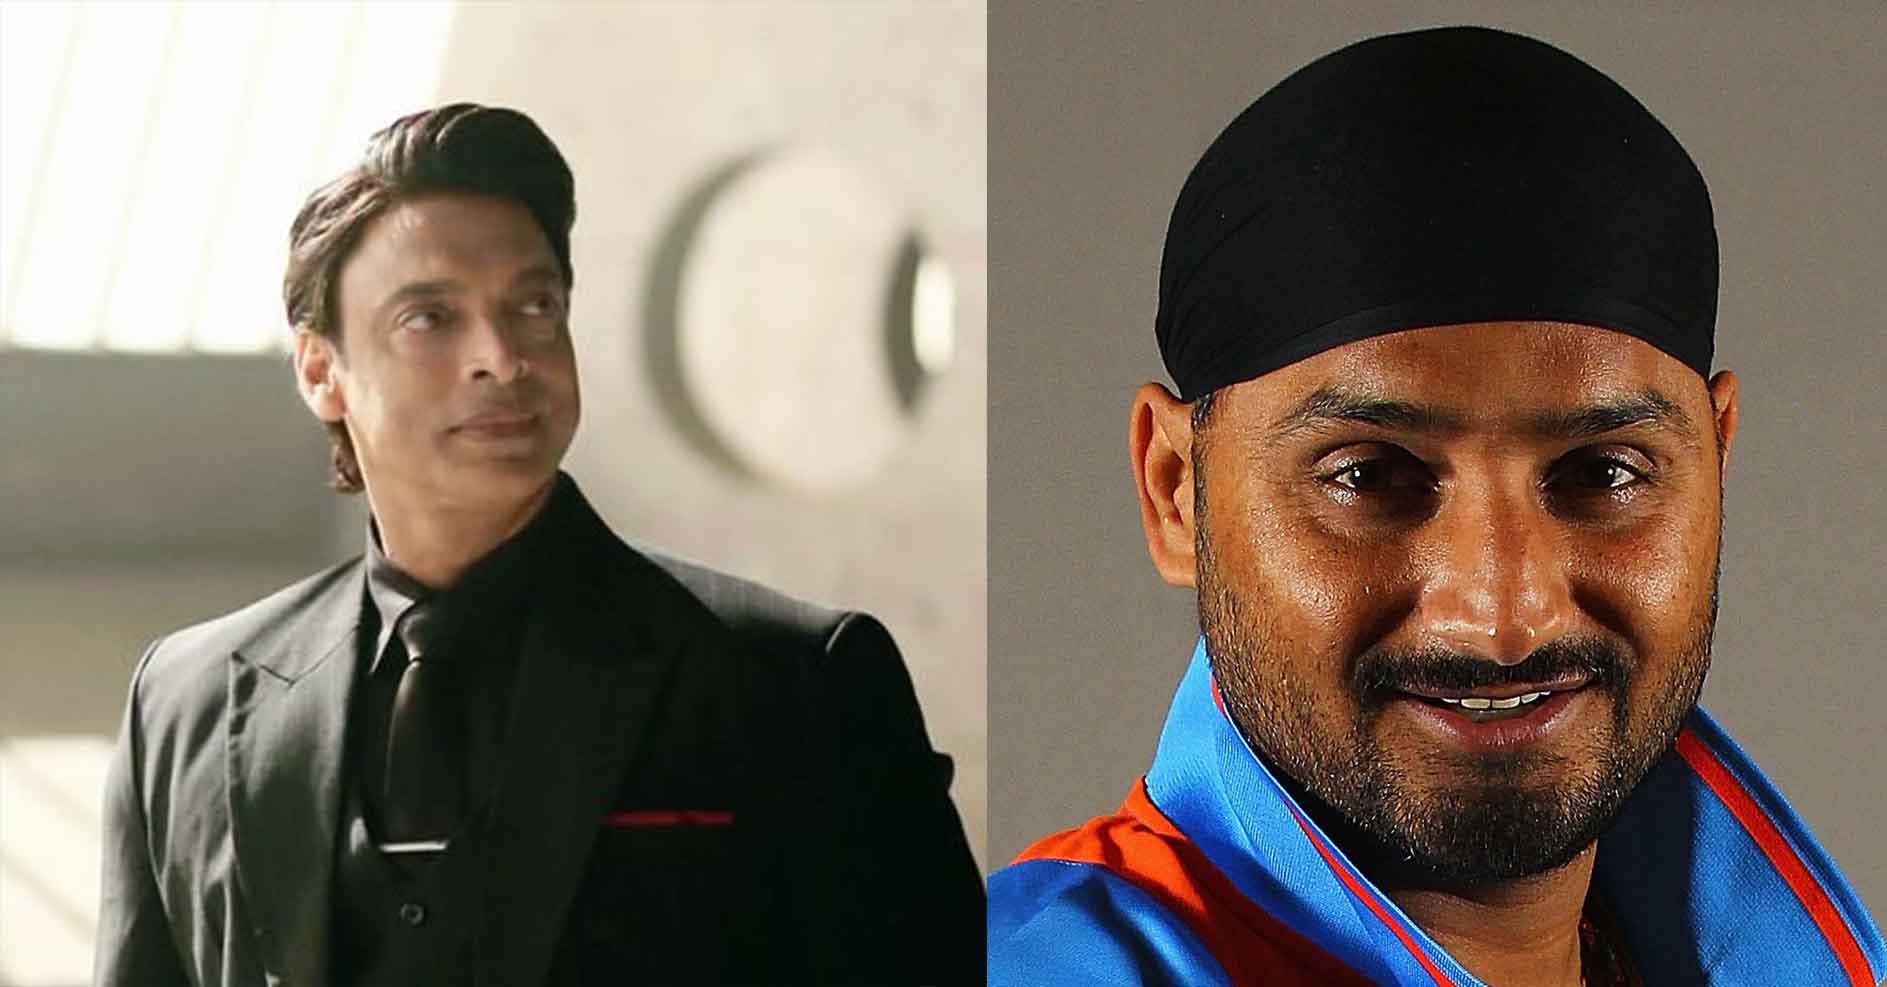 harbhajan-singh-and-shoaib-akhtar-take-jabs-at-one-other